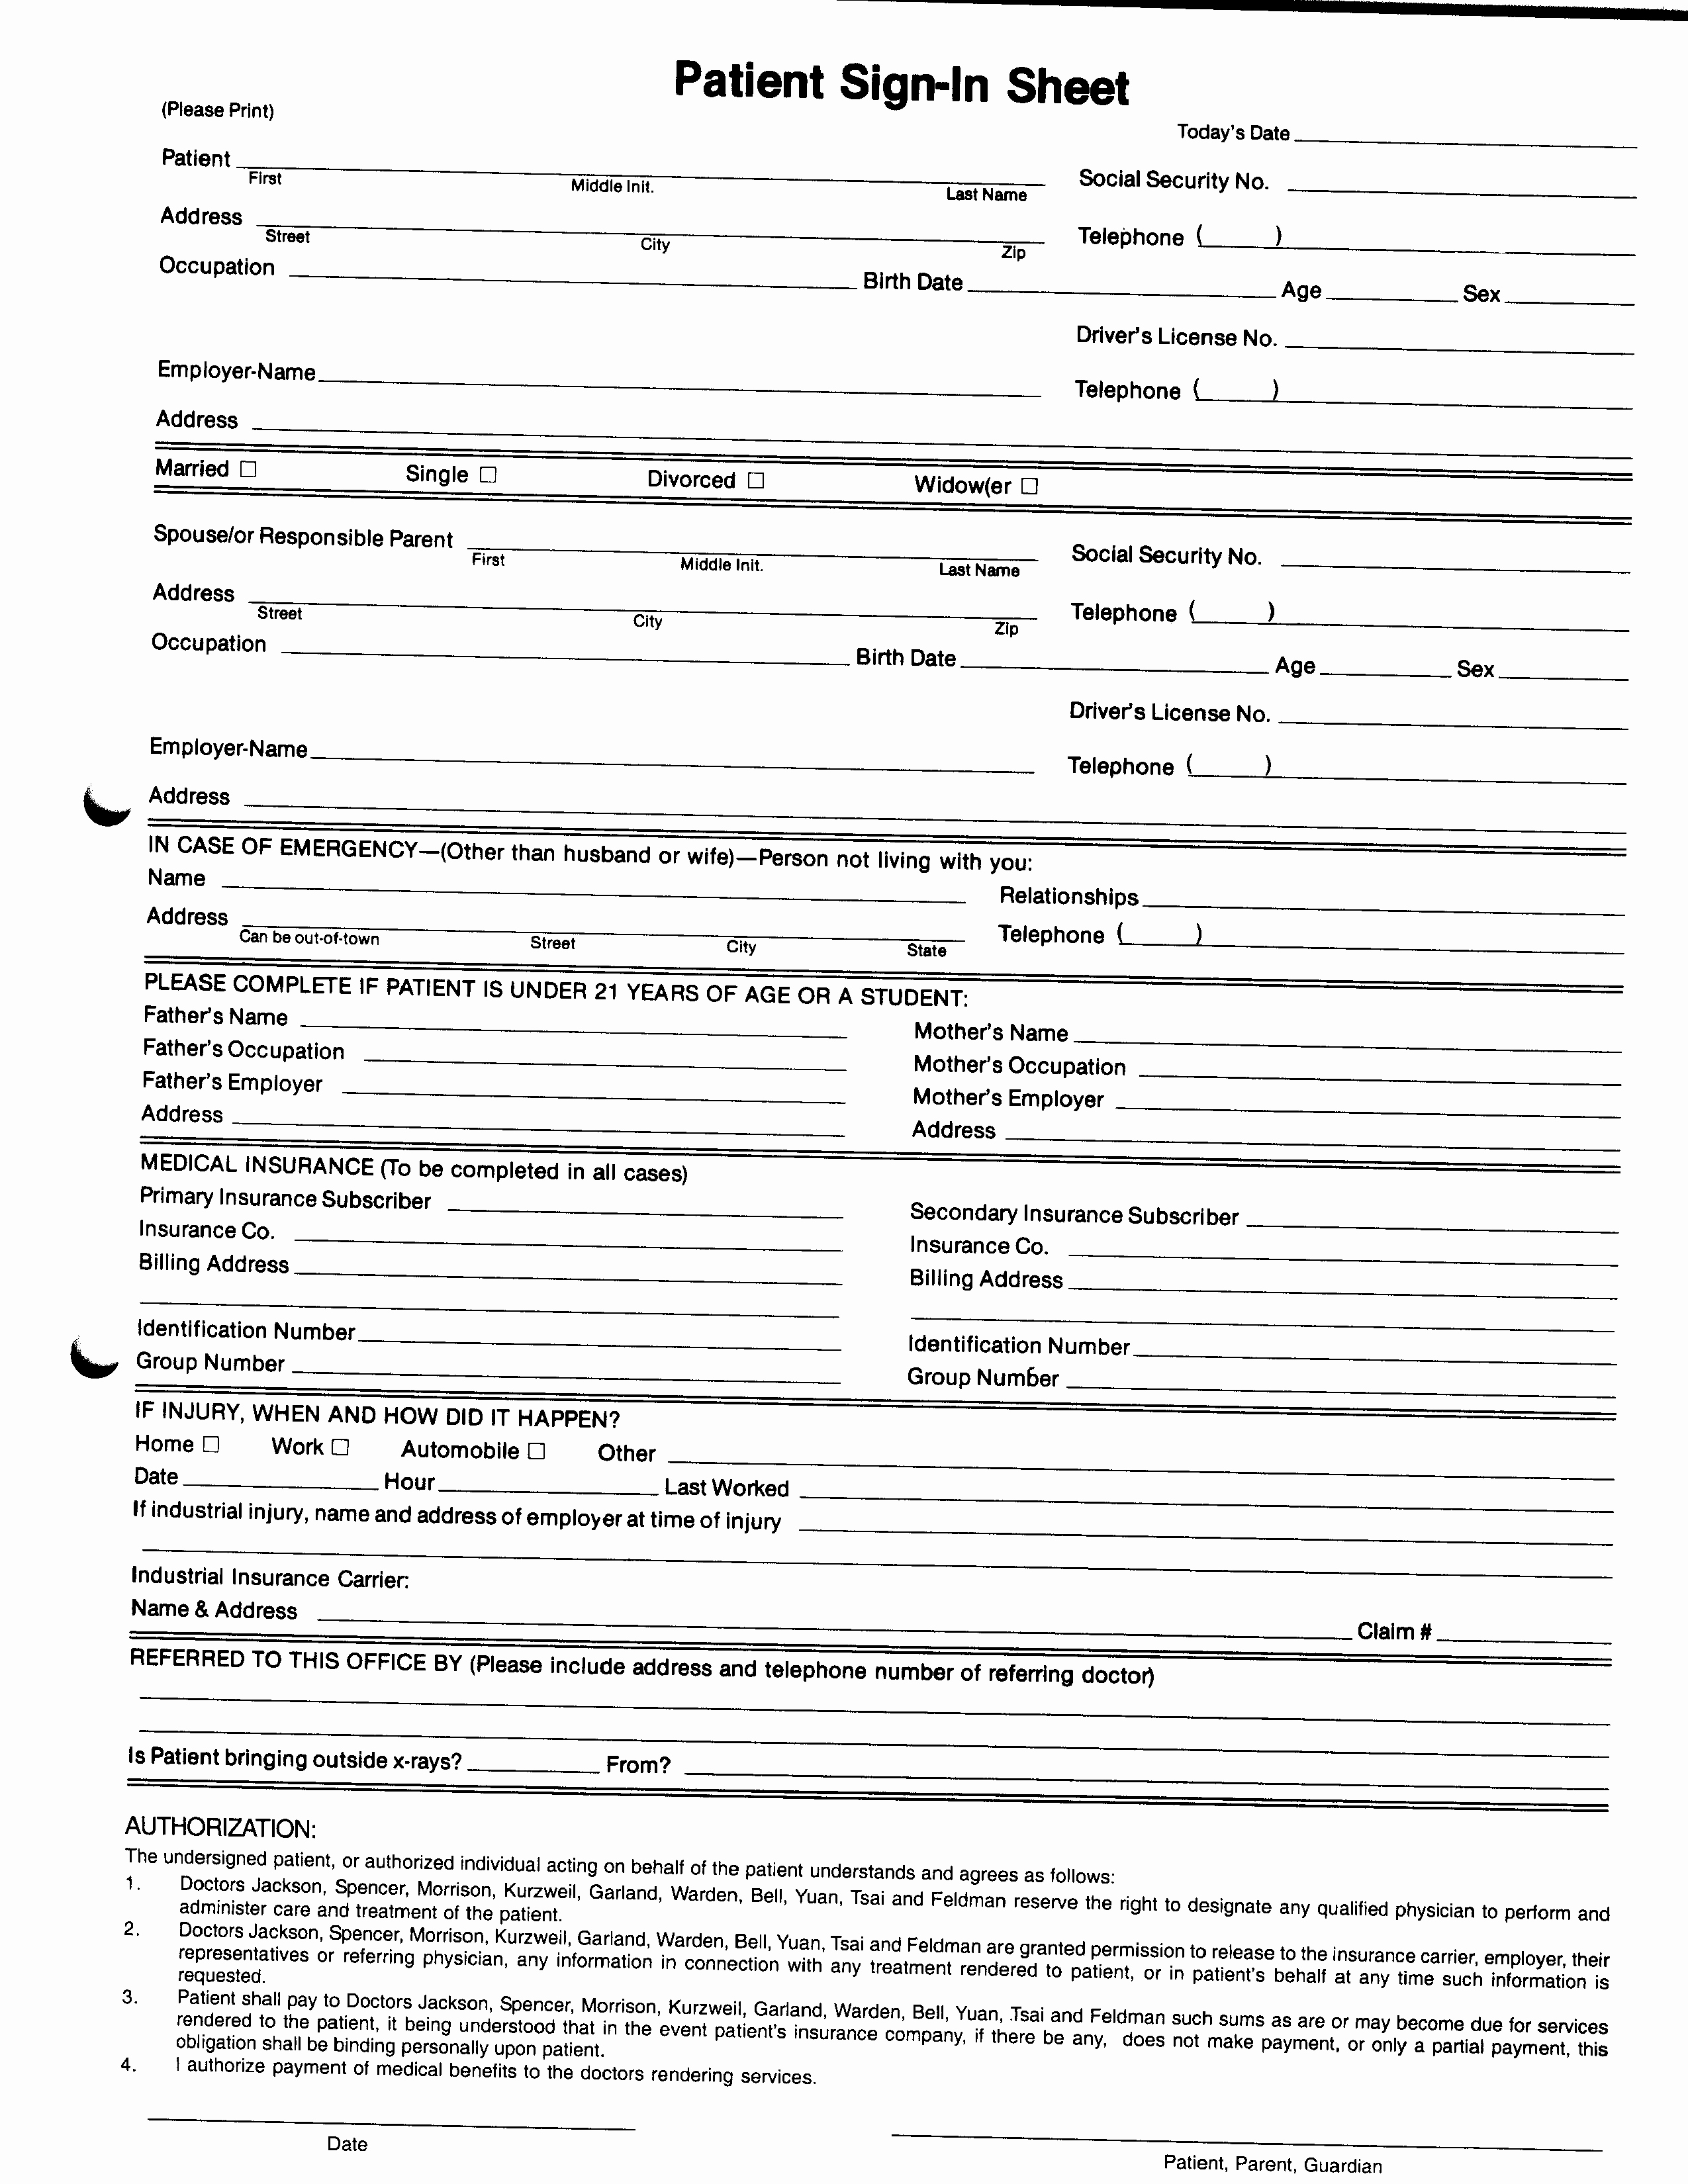 Patient Sign In Sheet Template Fresh Patient Sign In Sheet